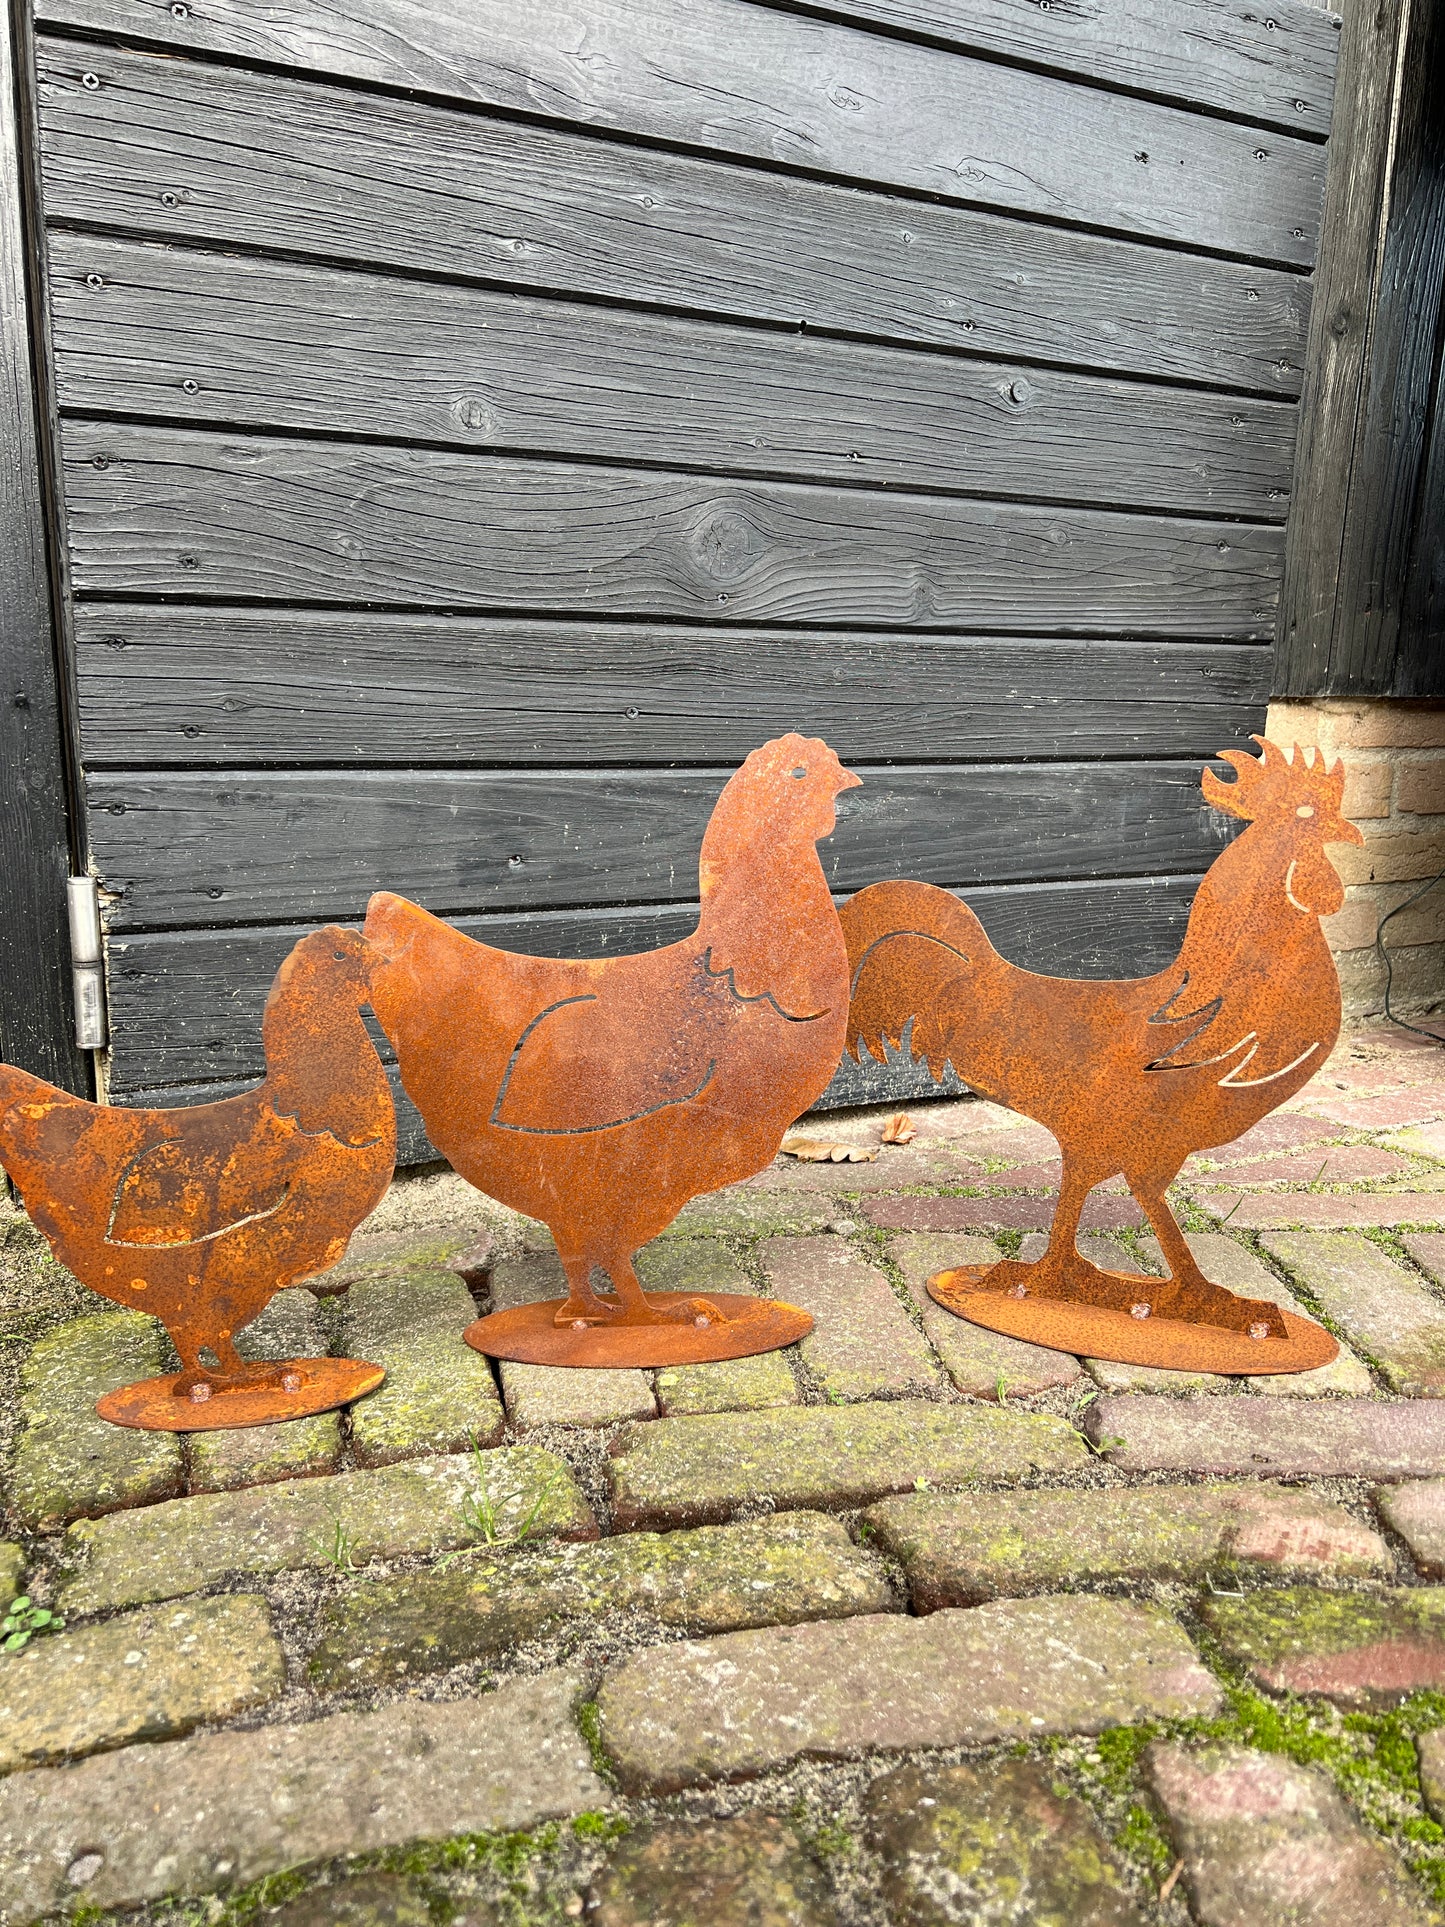 Hen on base, rusted